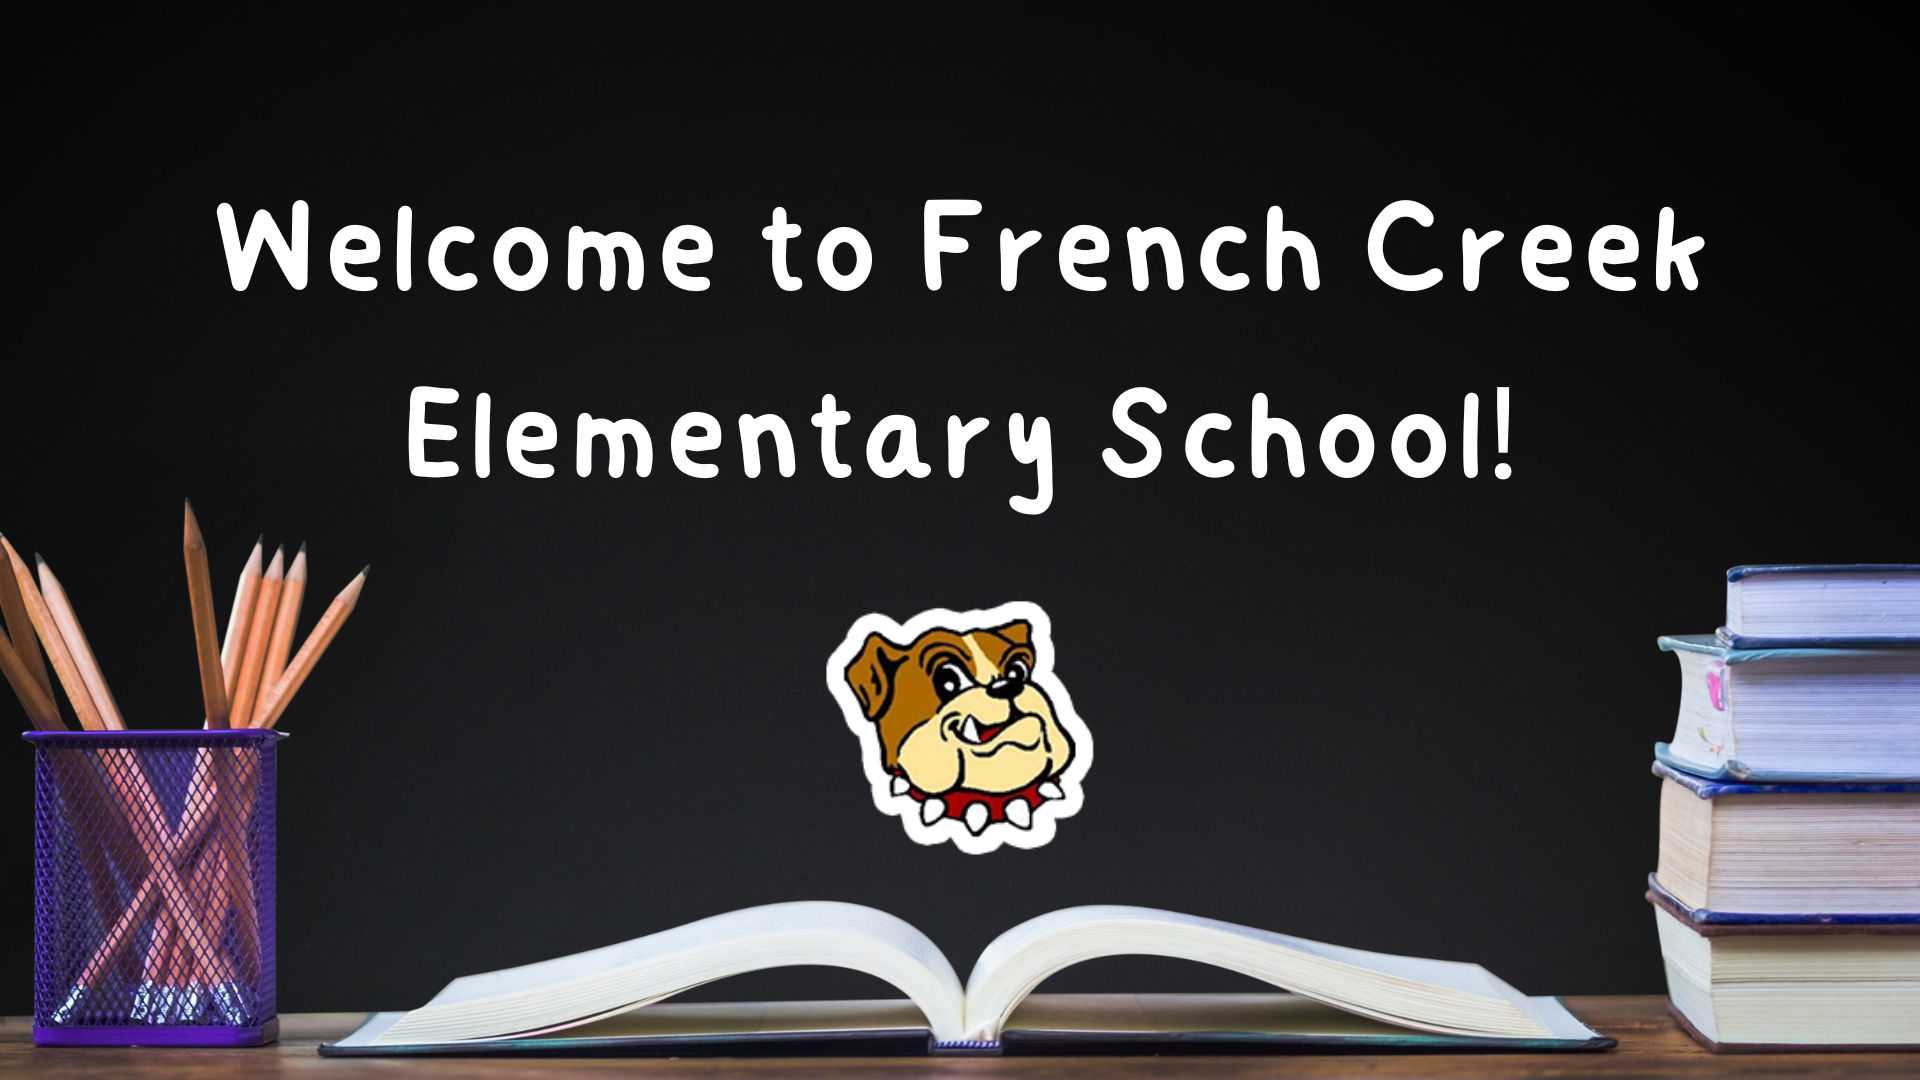 Welcome to French Creek Elementary School!